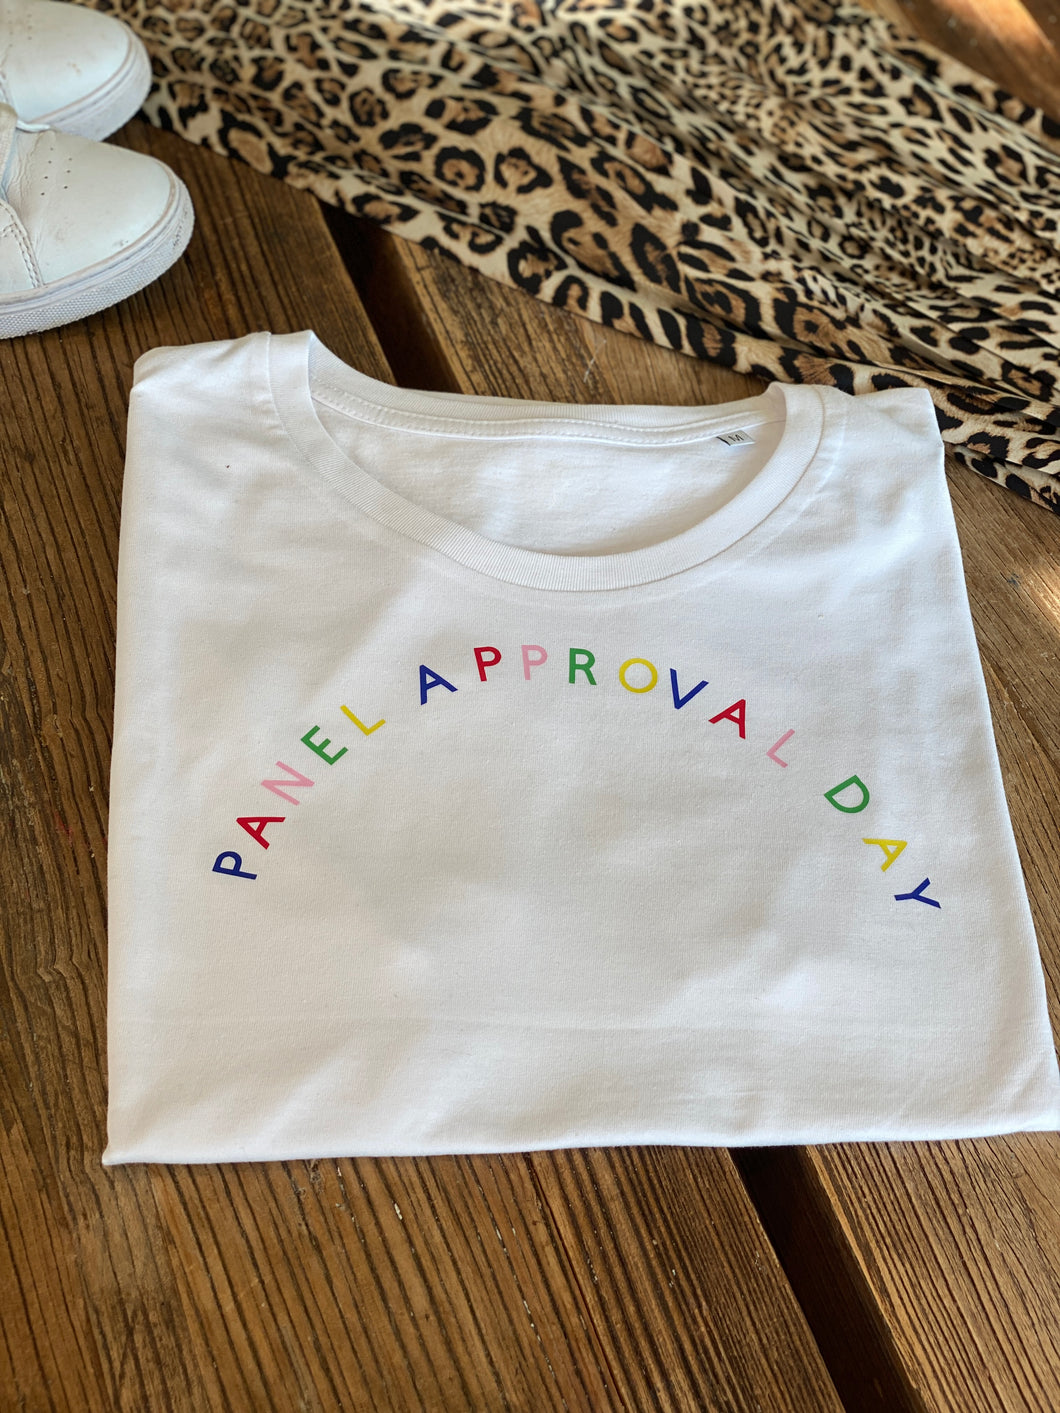 Panel approval days adoption t-shirt